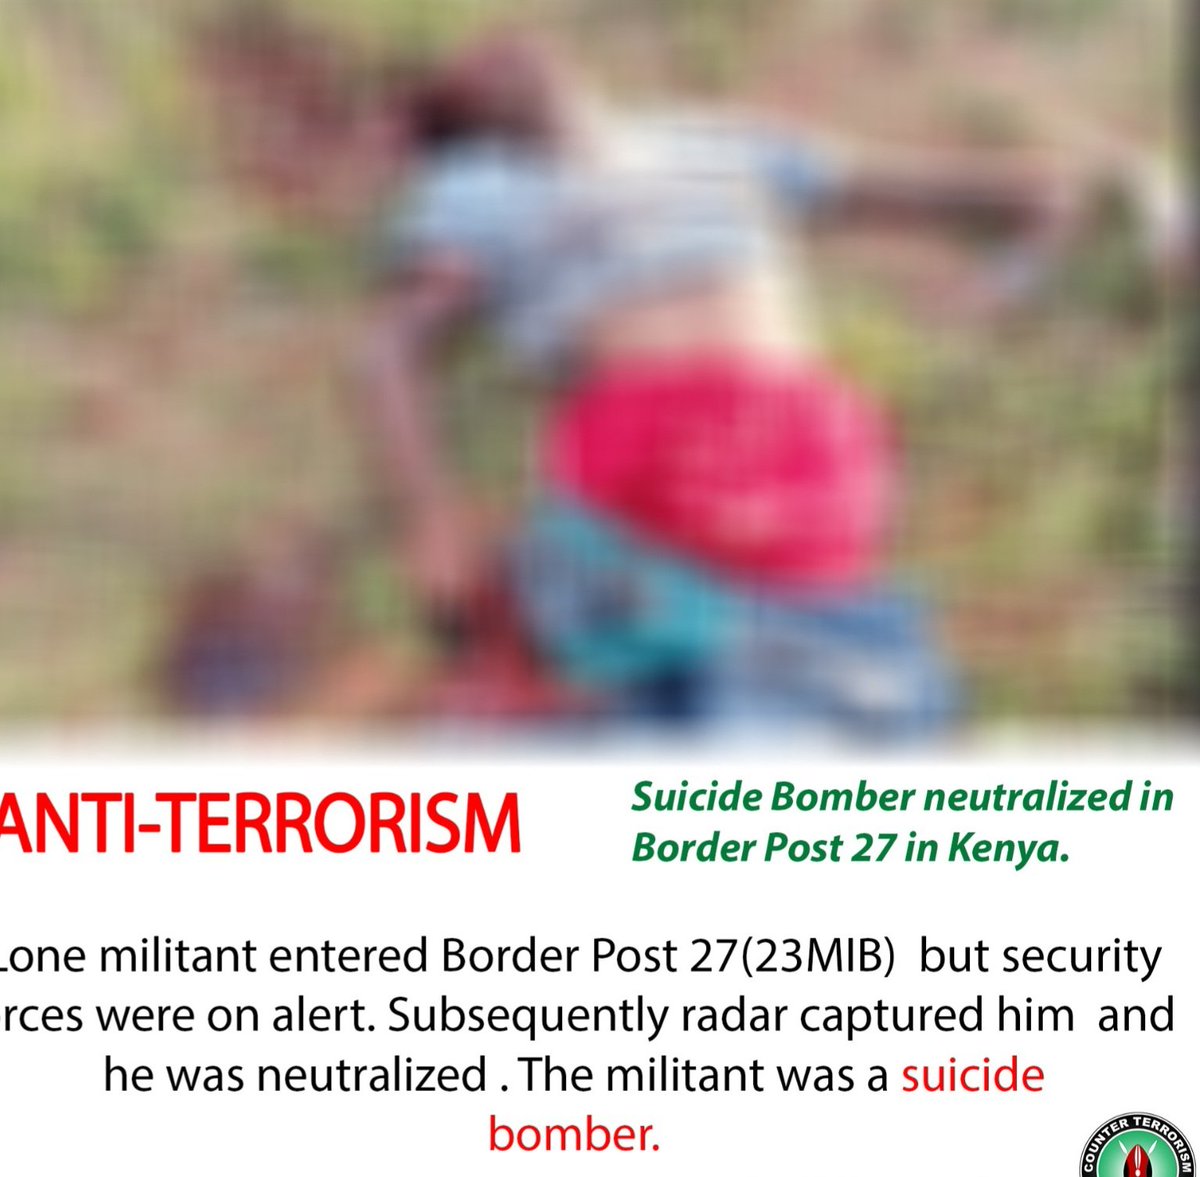 #KDF soldiers killed #AlShabaab suicide bomber who attempted to attack their camp at Sarira in #Lamu County. The hawk-eyed soldiers had earlier brought down a drone belonging to the terrorist group which was on surveilling the camp. #ActionCountersTerrorism @HonAdenDuale